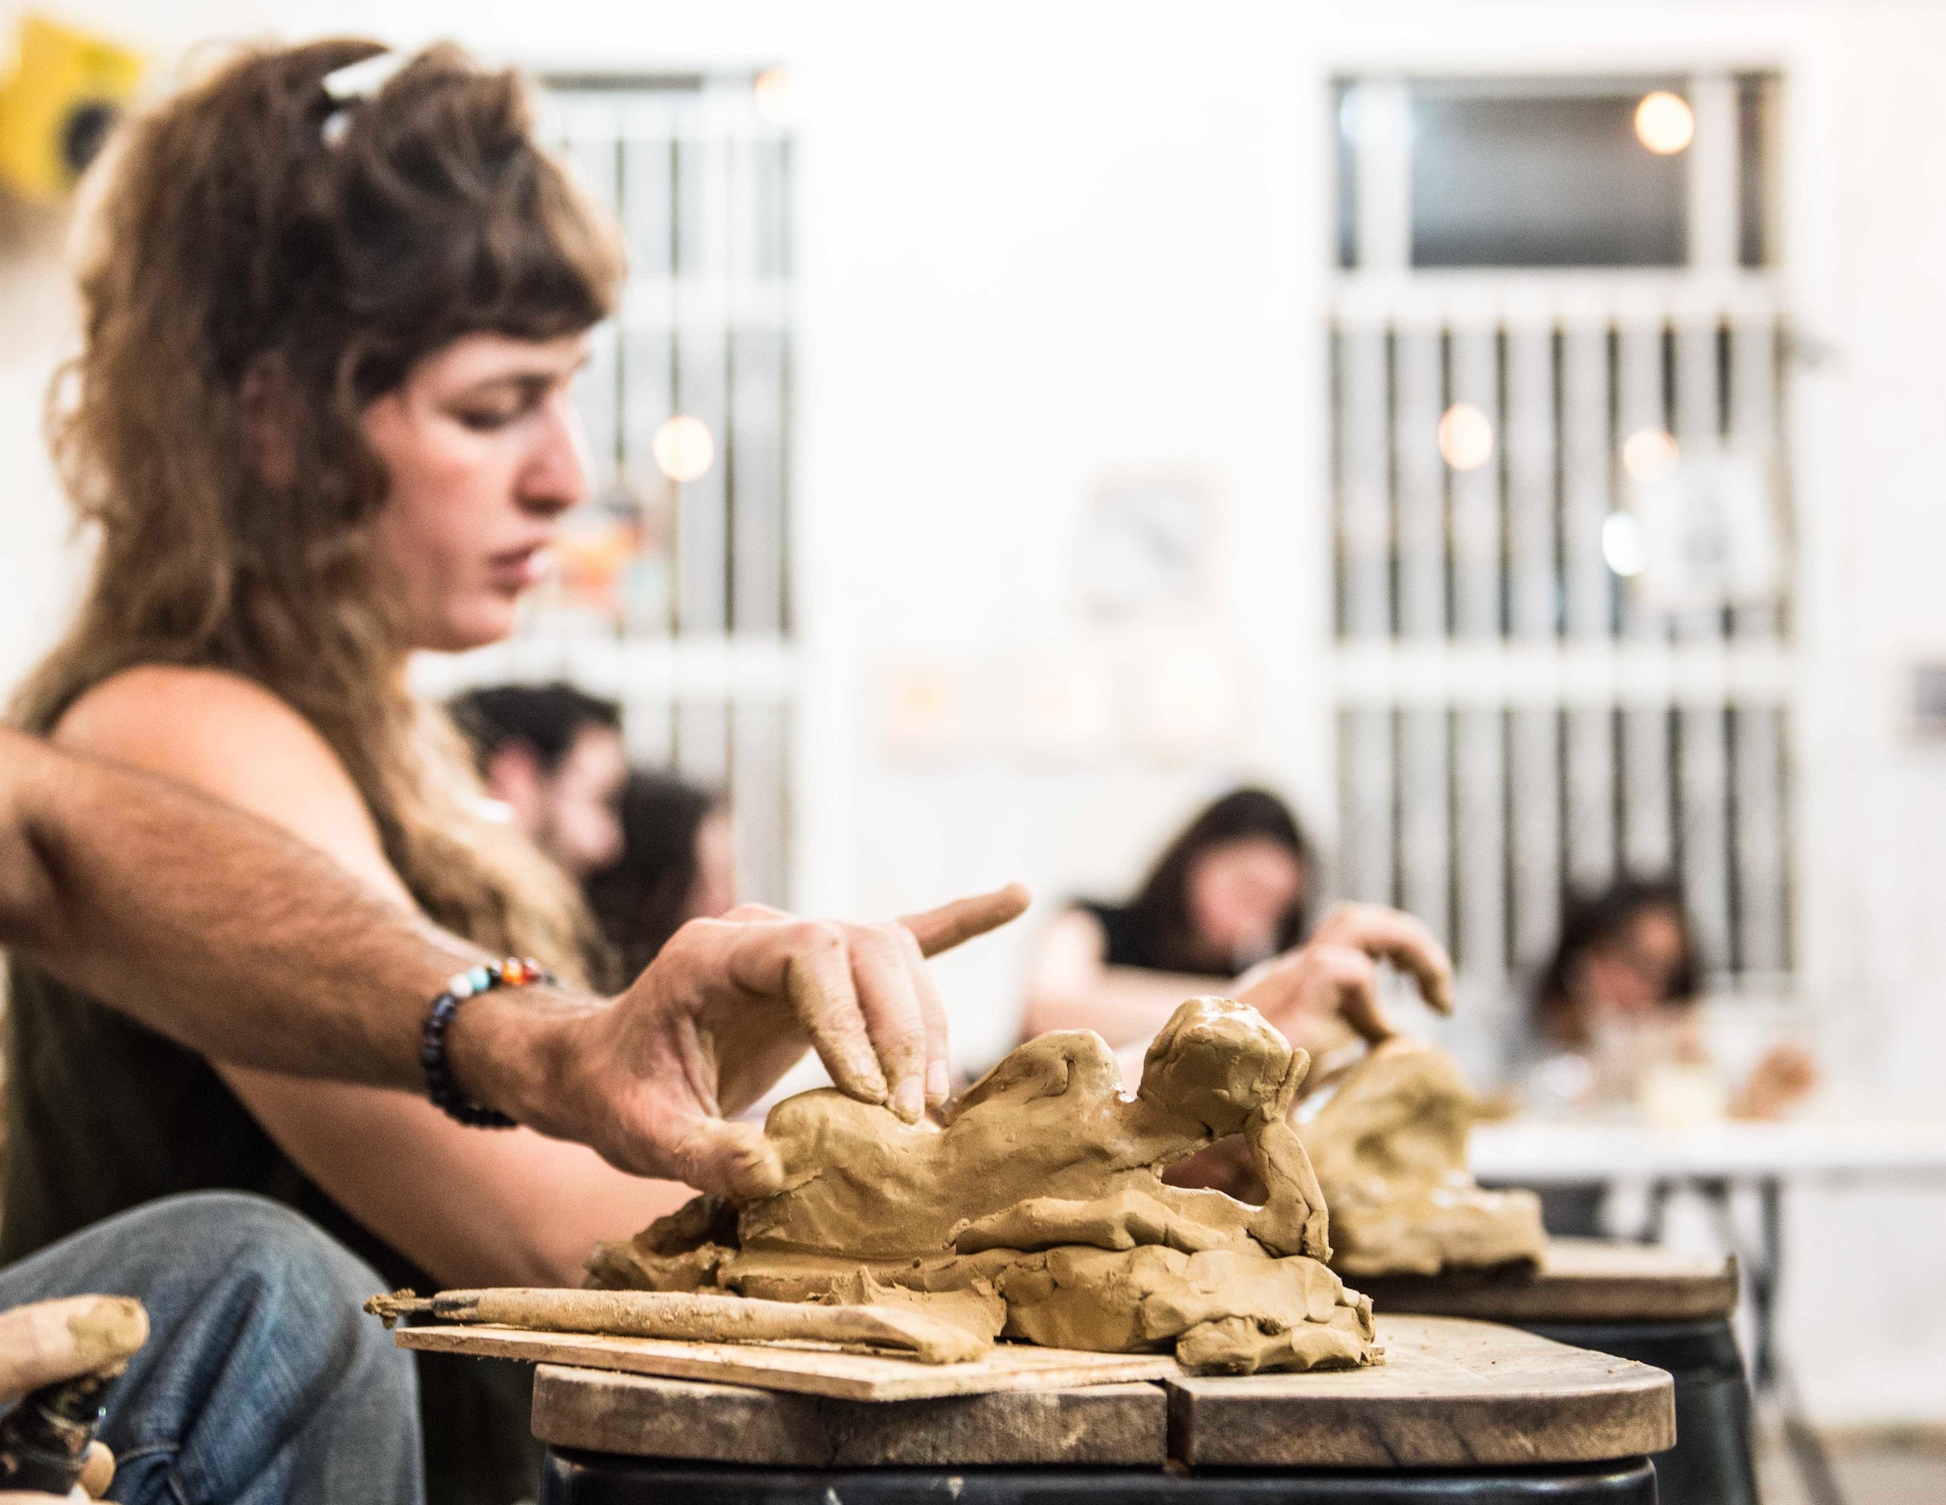 Life Model Sculpting & Drawing Workshop for Beginners with Ella in Berlin, Germany by subcultours